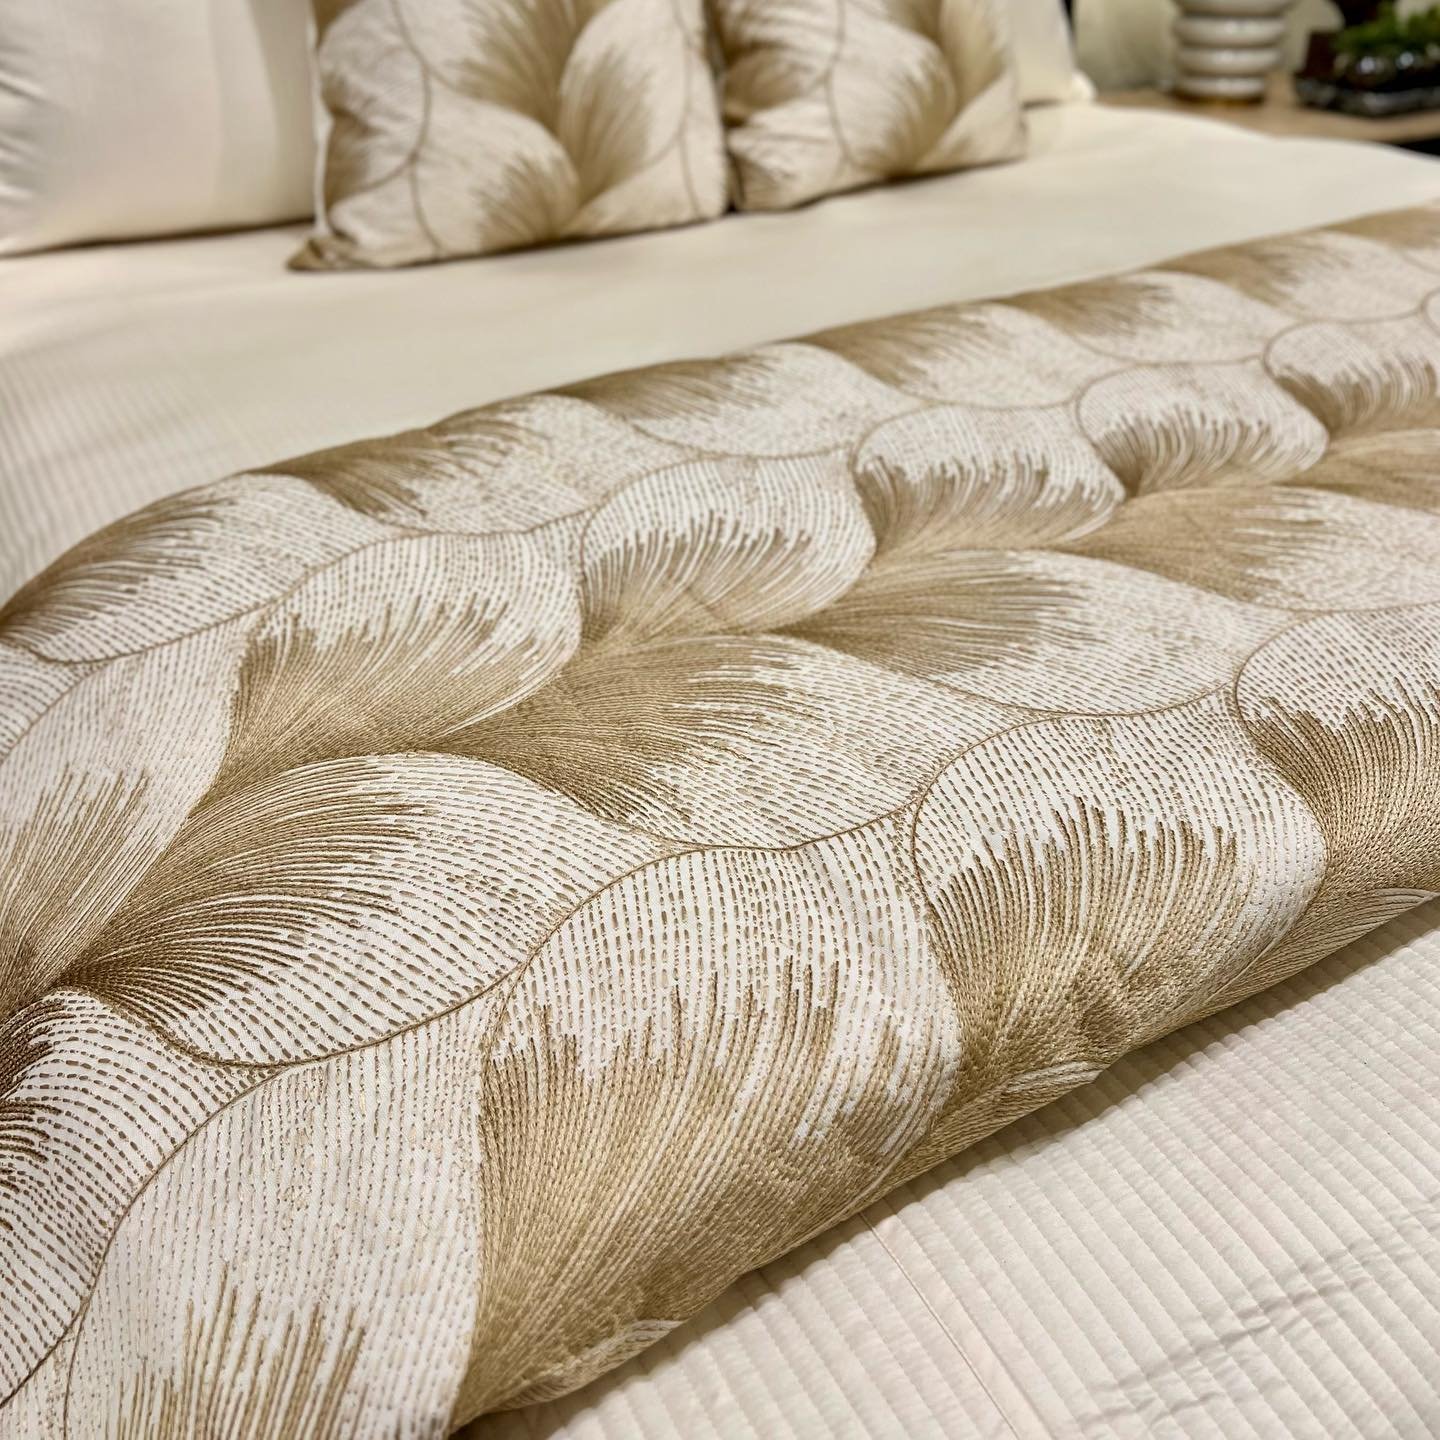 We have yet another piece of Met Magic you can bring into your home! This bedding&rsquo;s stunning feather motif is directly inspired by a 1920&rsquo;s fan from the collections of the Metropolitan Museum of Art. See the link in bio to view the inspir